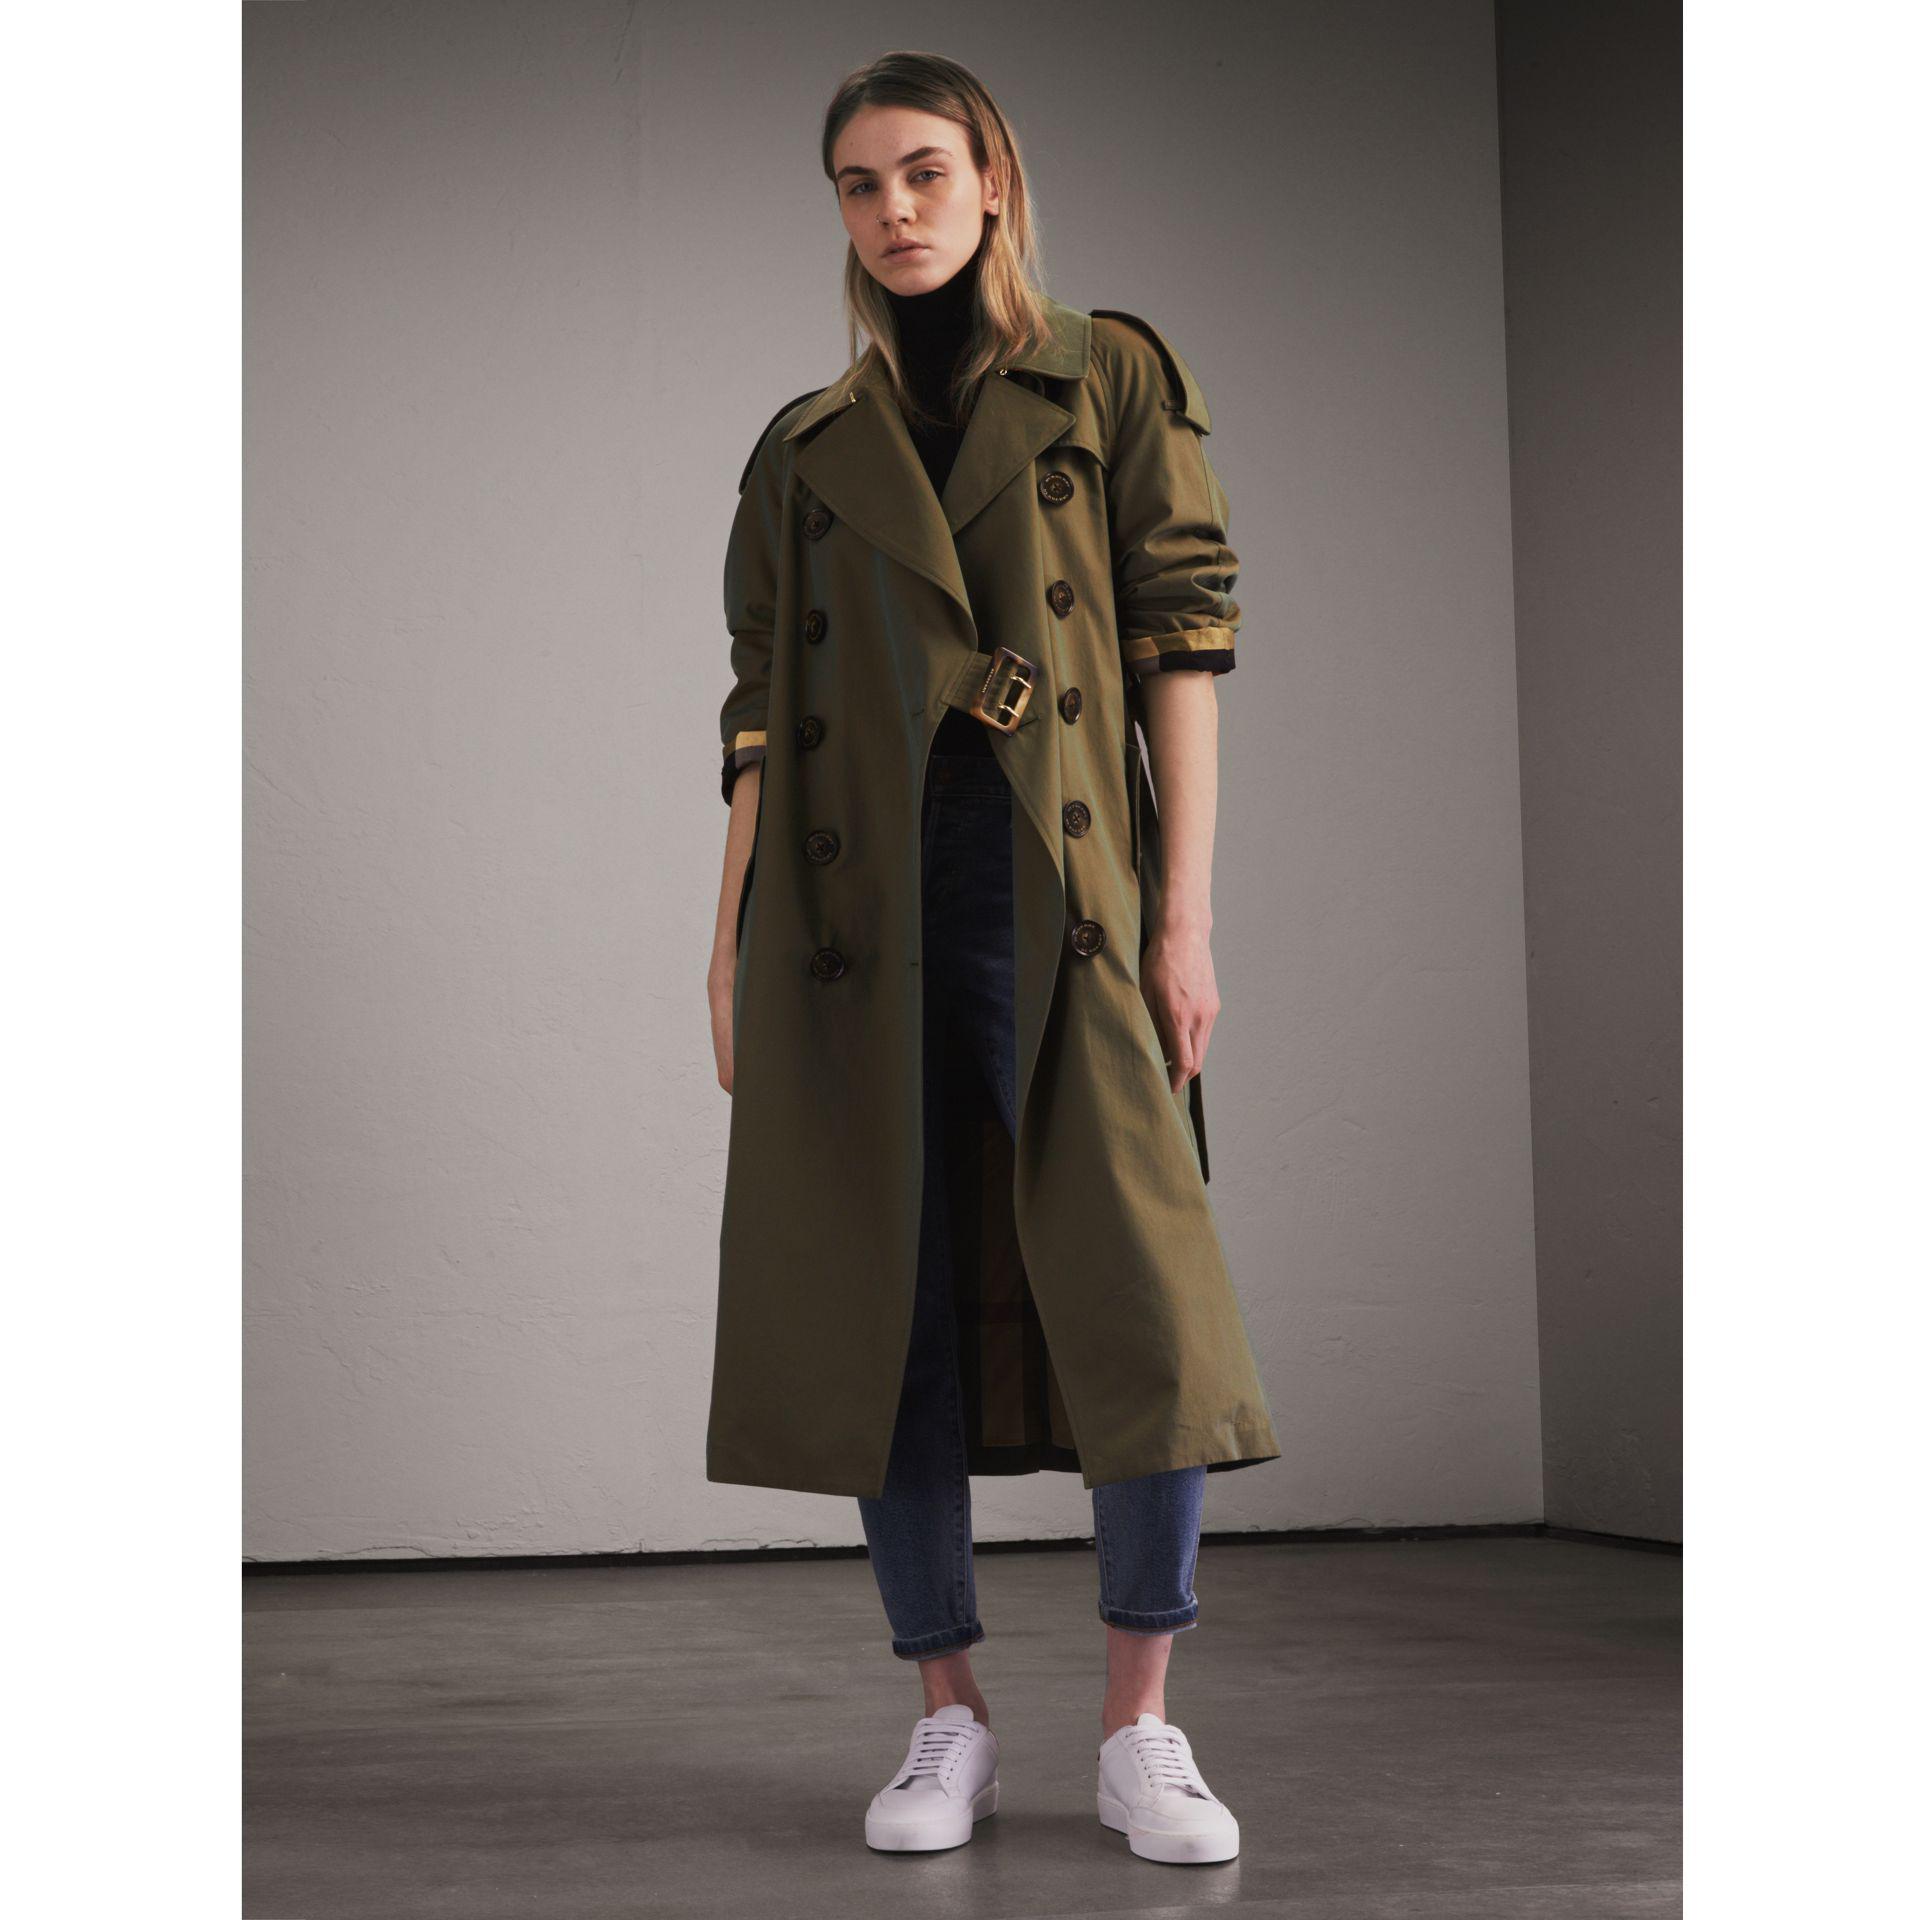 burberry trench coat olive green